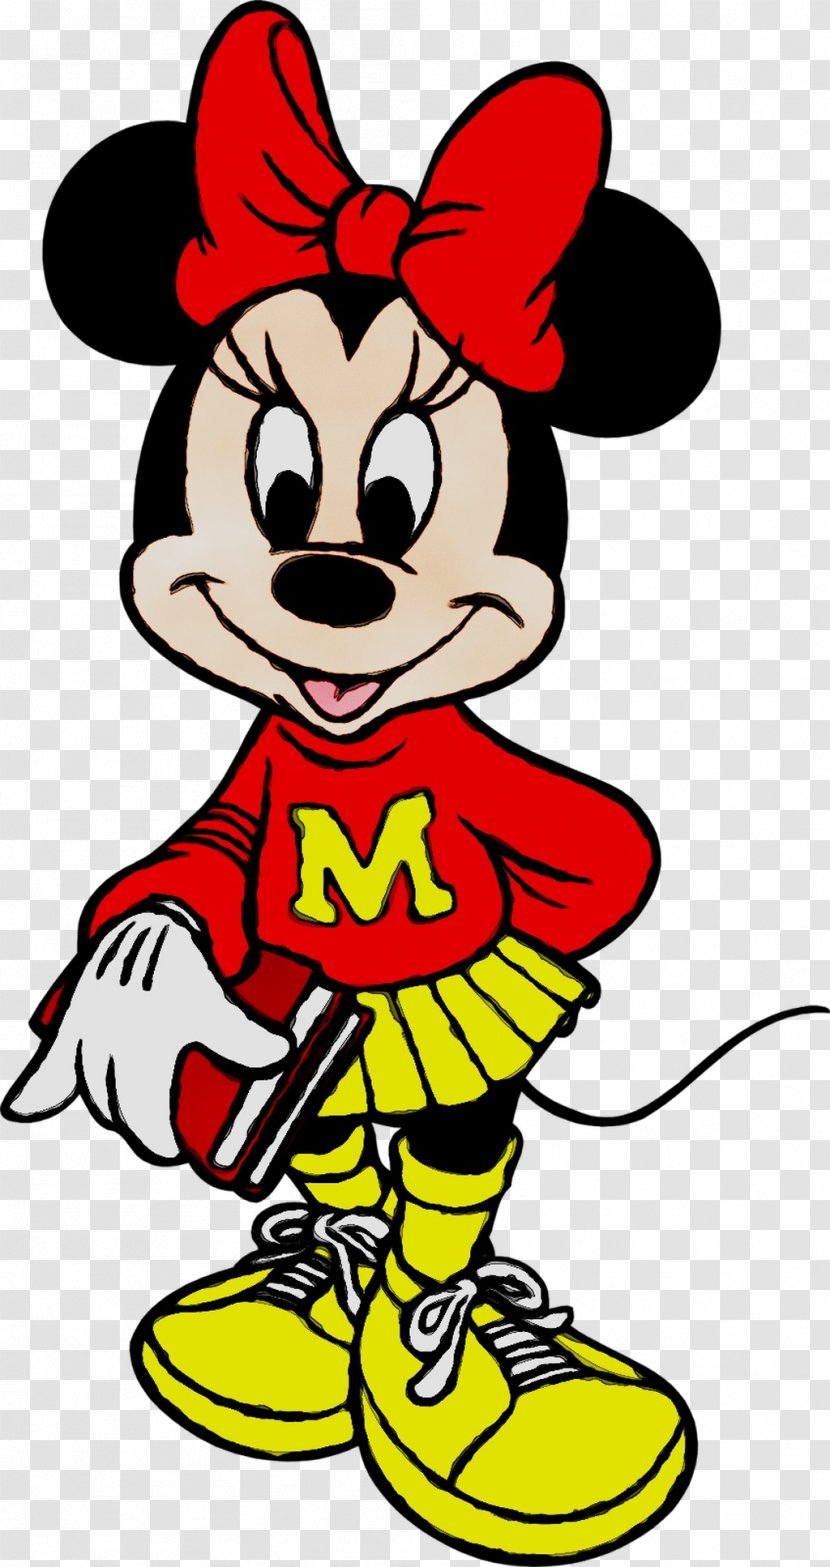 Minnie Mouse Drawing Mickey Illustration Painting - Online And Offline Transparent PNG